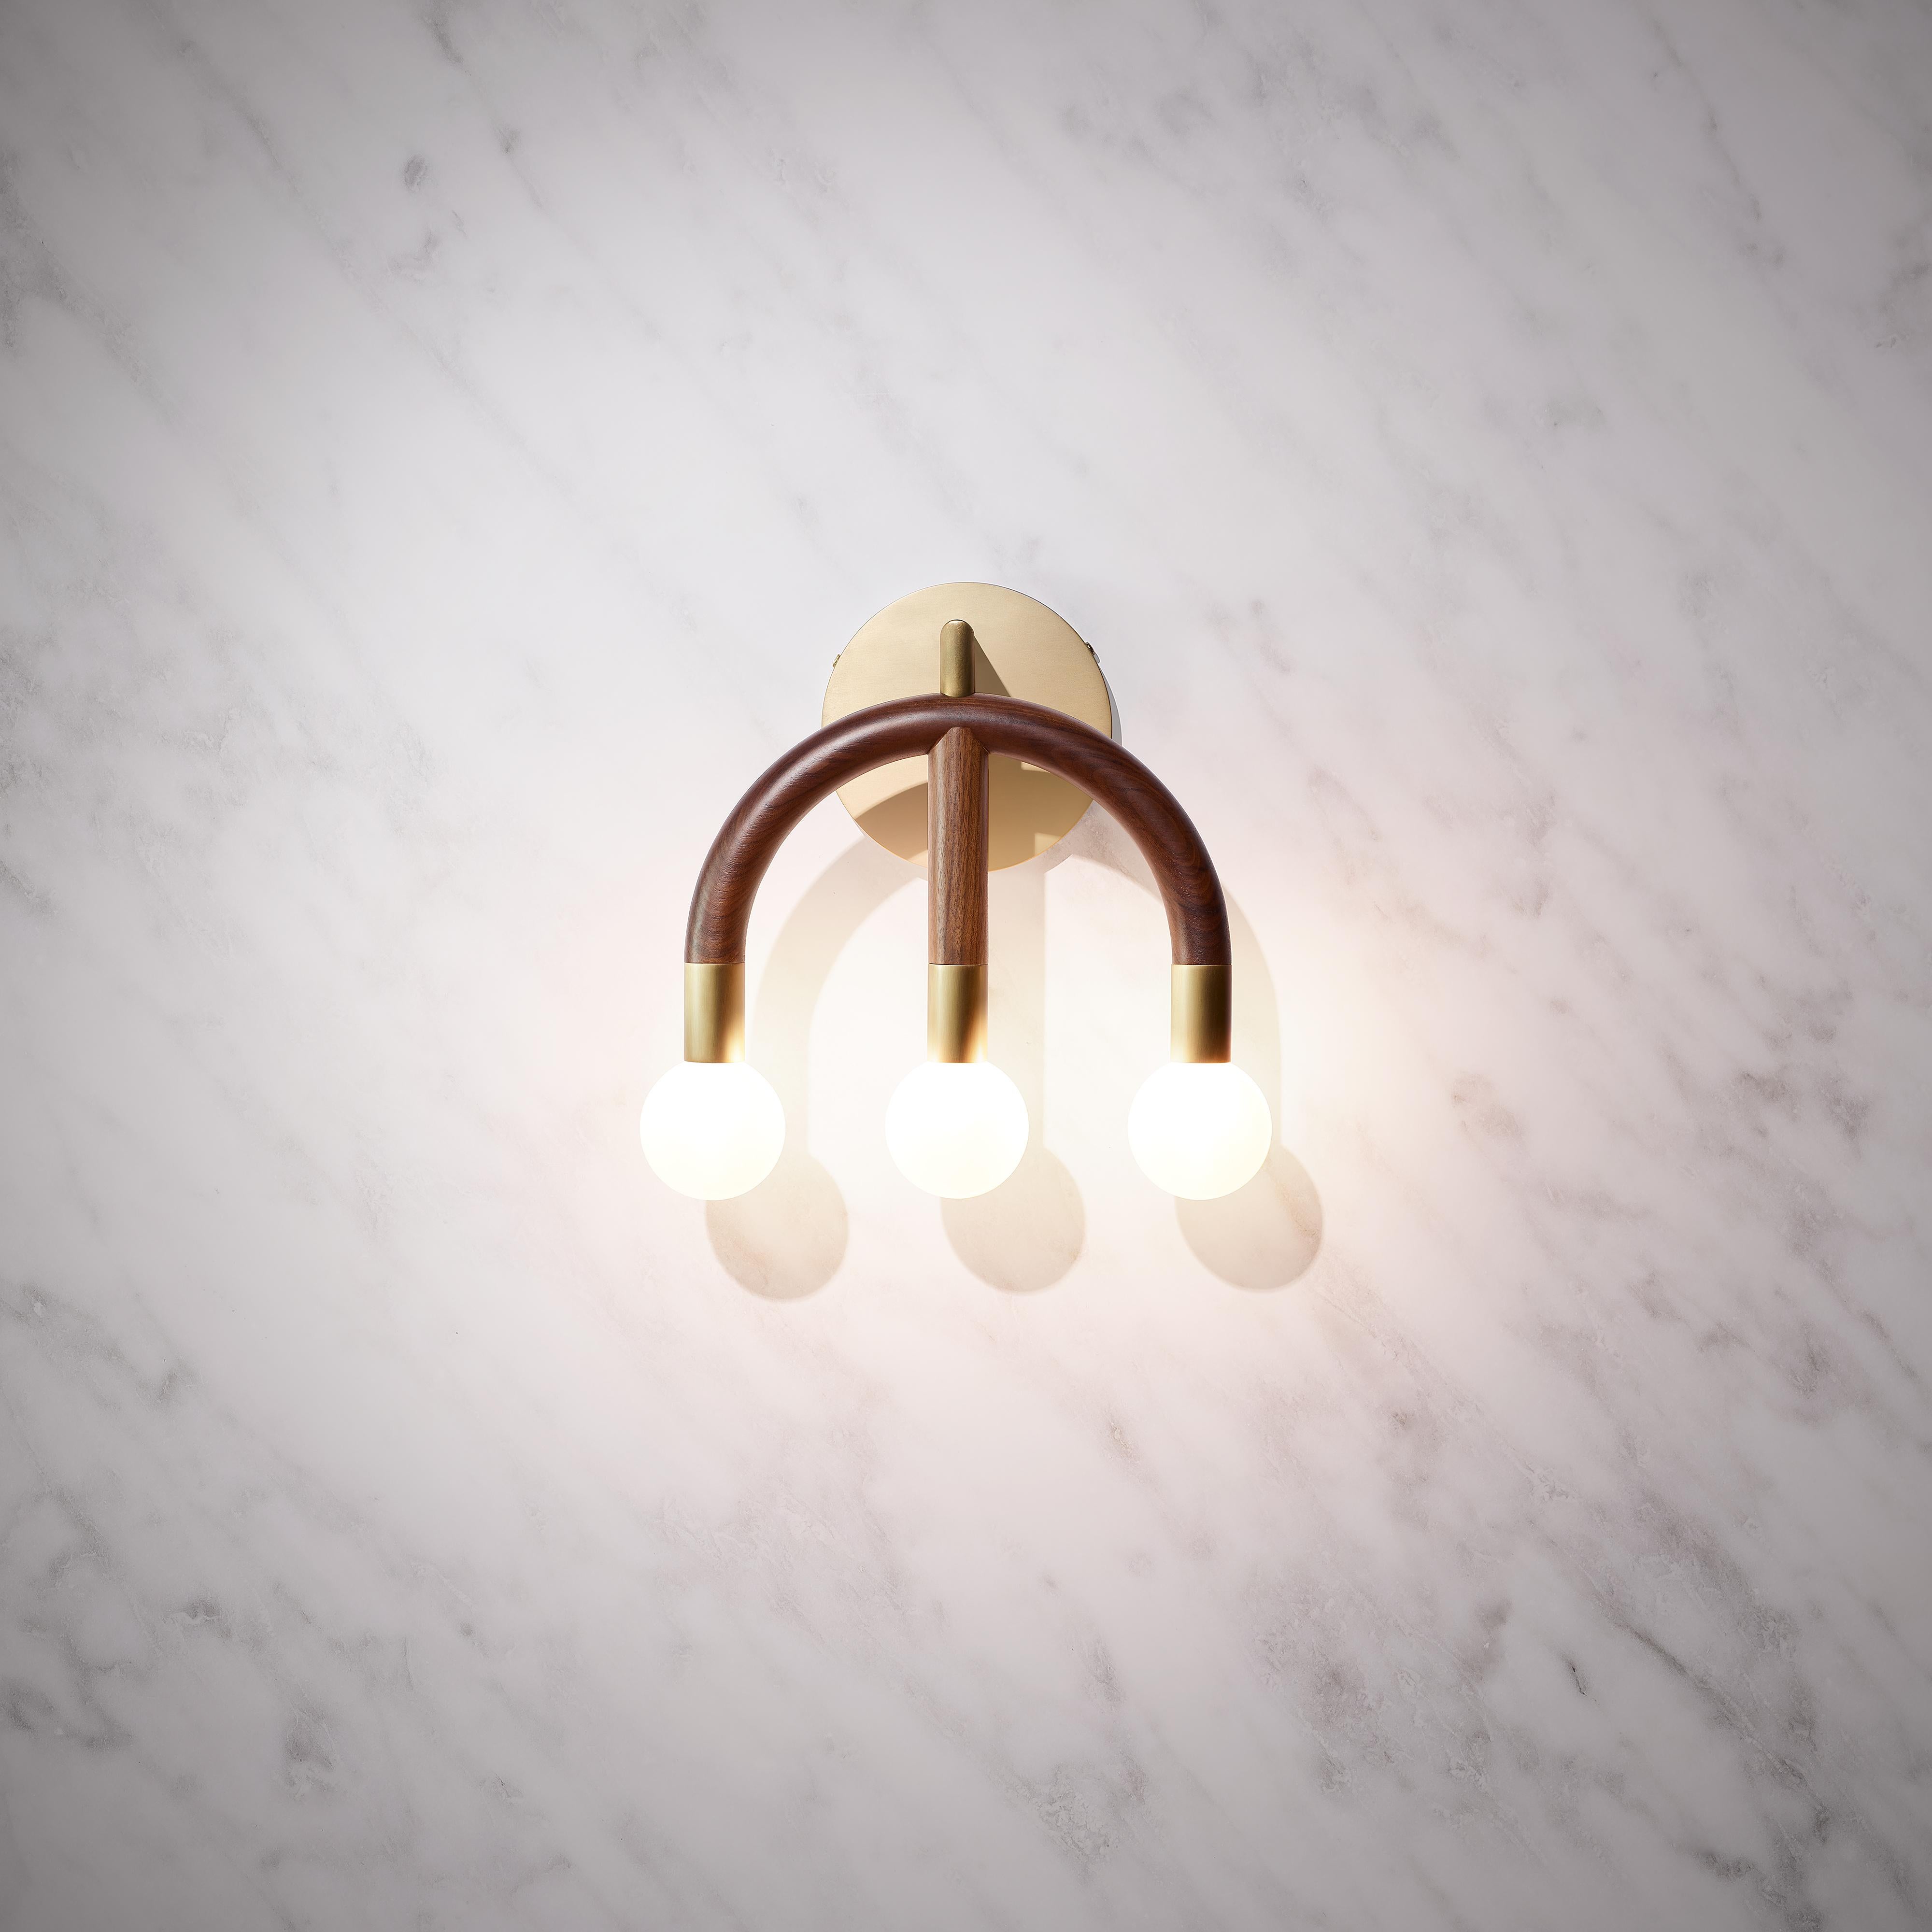 Materials : 
Solid walnut polyurethane finish
Solid brass pipe
Screw in glass shade / G9 LED bulbs 2700K
Size[inch] : W 12